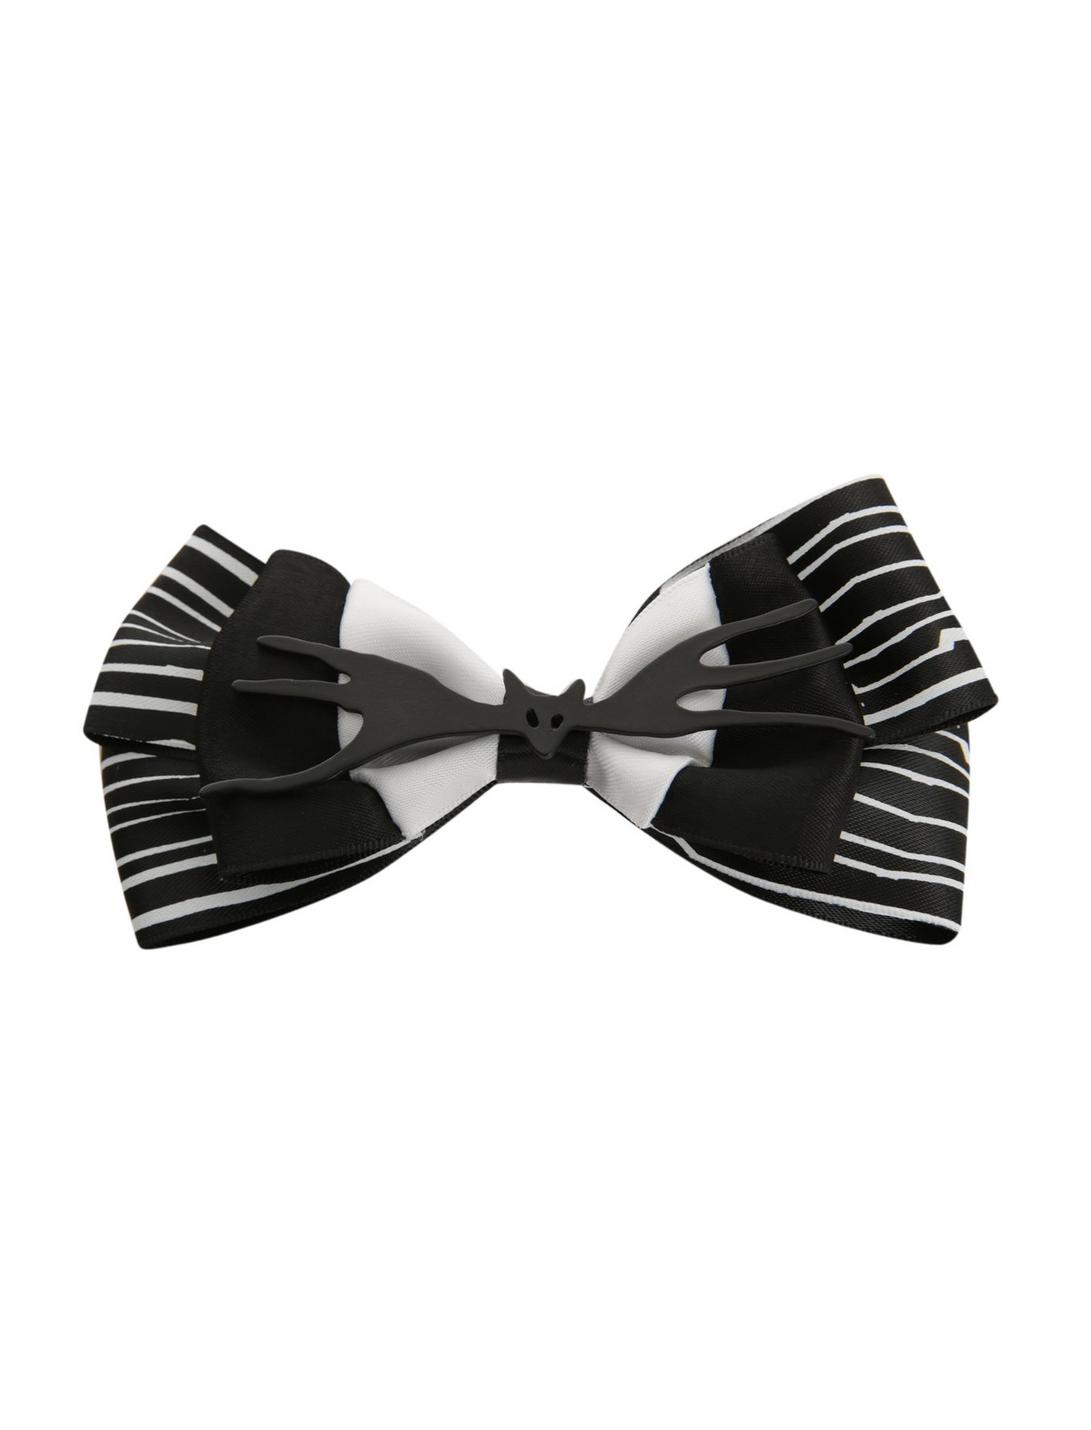 Jack and Sally Nightmare bow by Inspired Bows